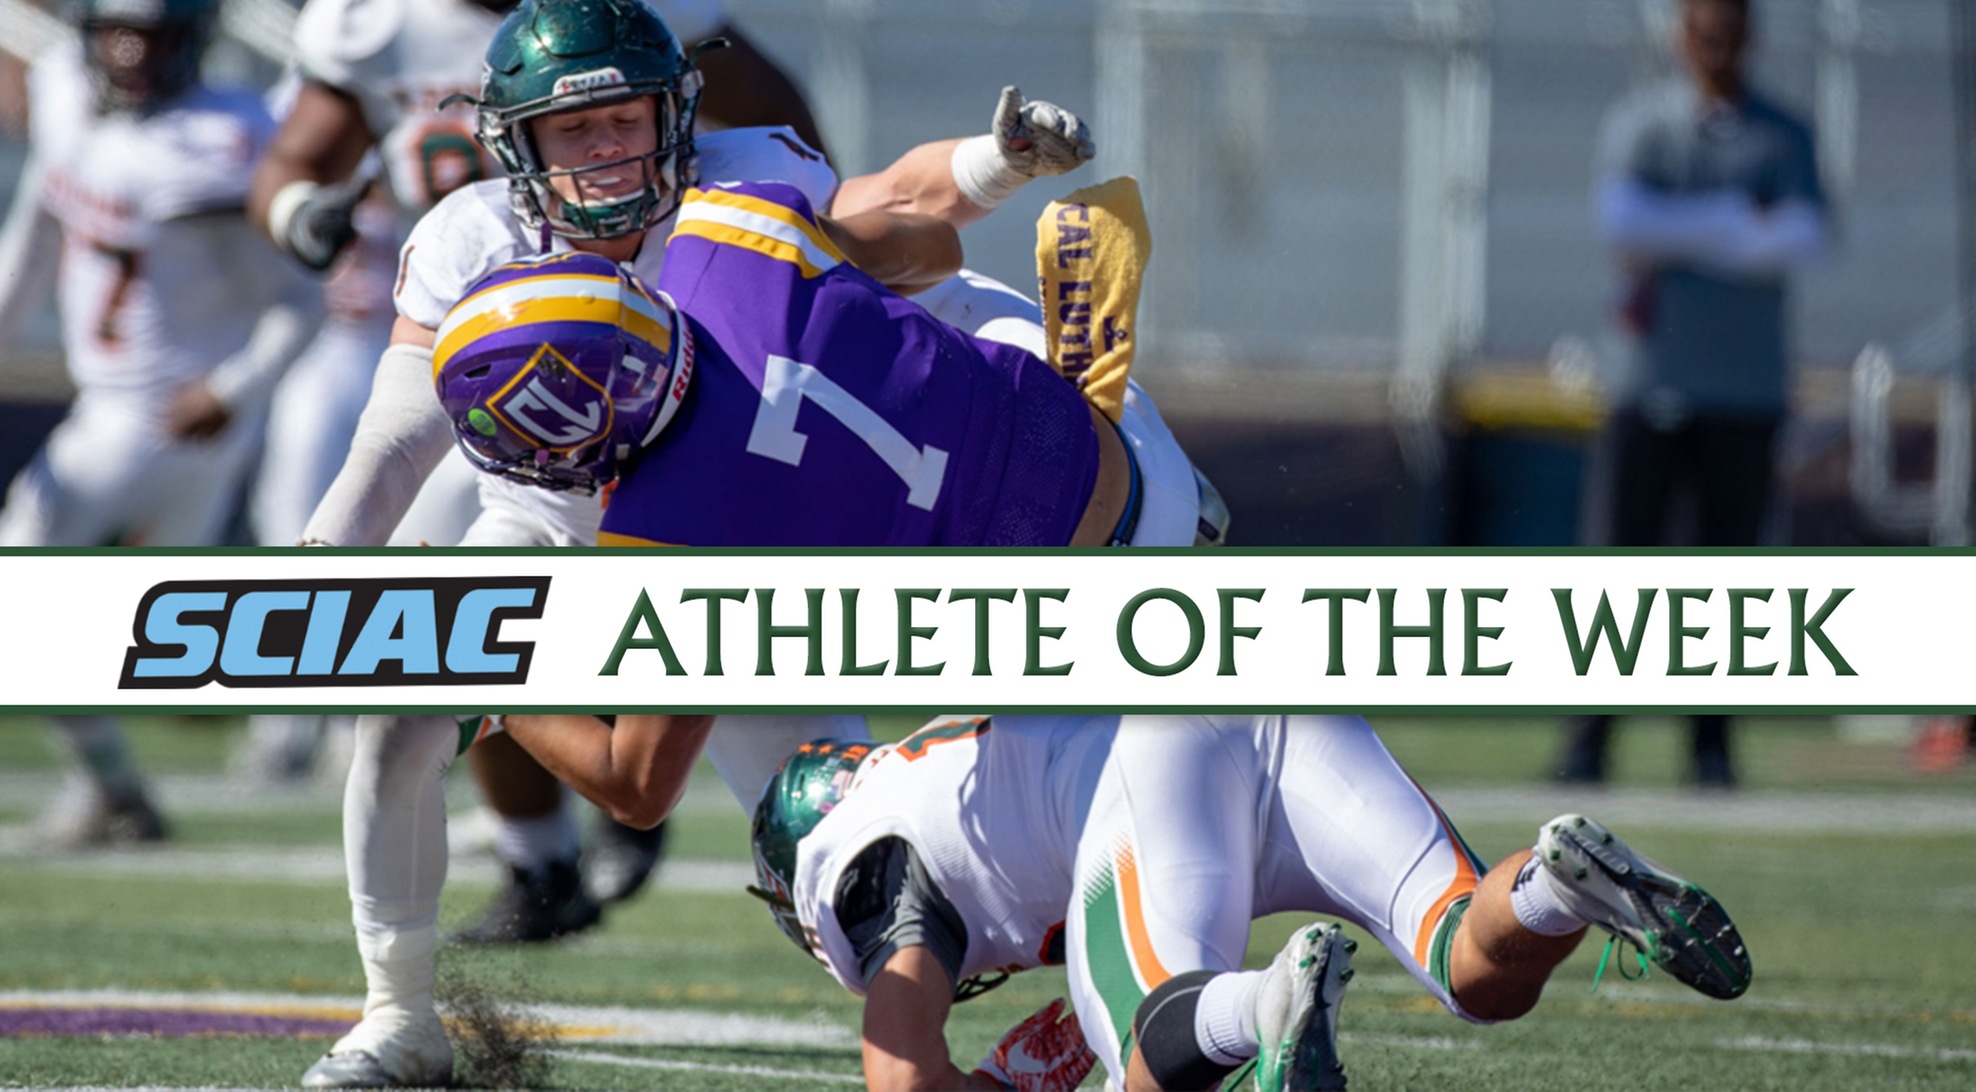 Johnson Named SCIAC Athlete of the Week